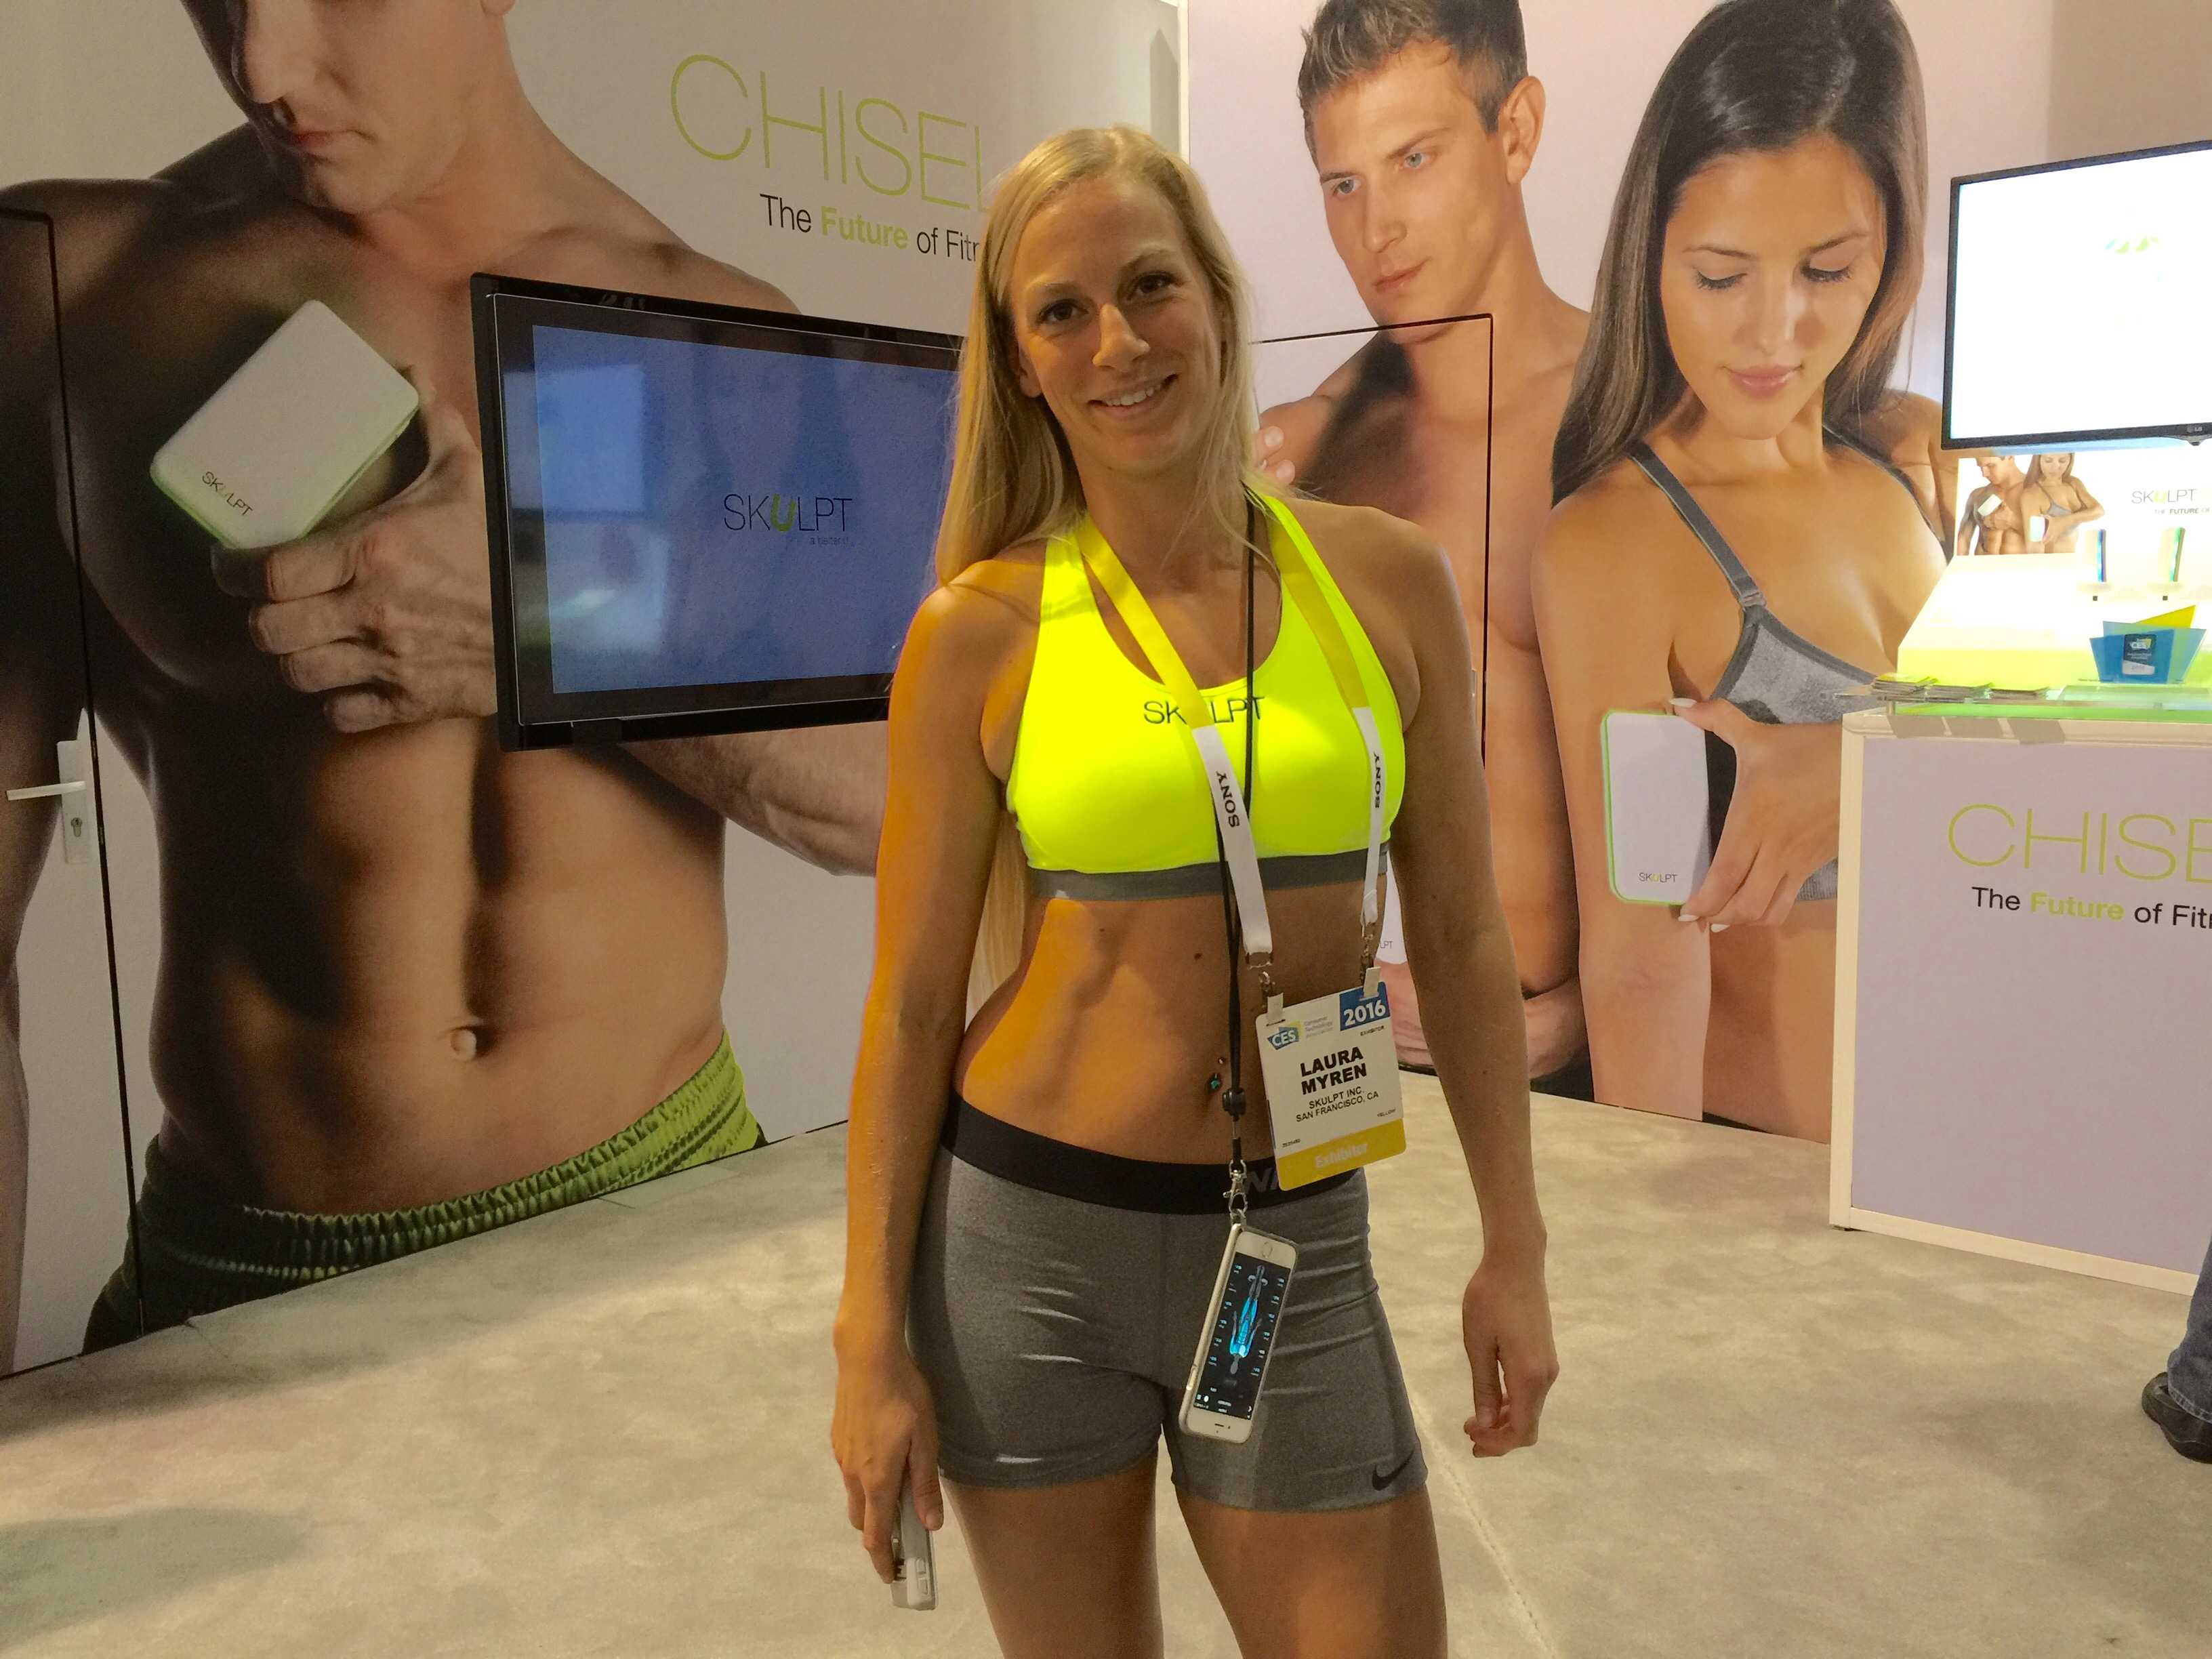 CES's booth babes have been replaced by toned fitness models.